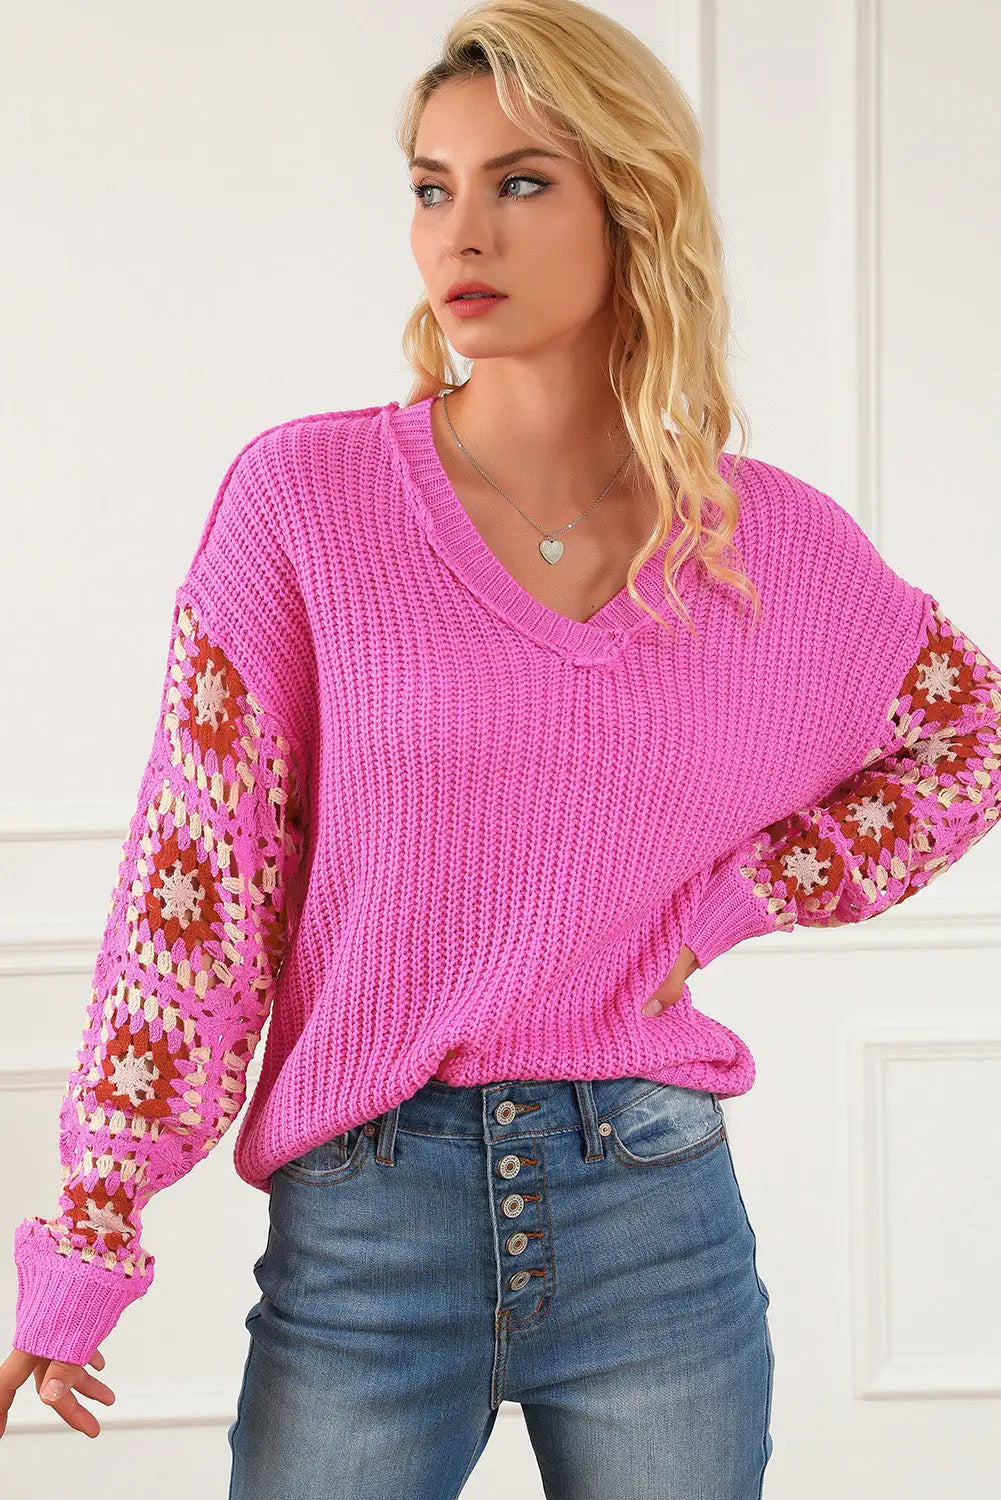 Rose floral crochet cable knit v neck sweater - sweaters & cardigans